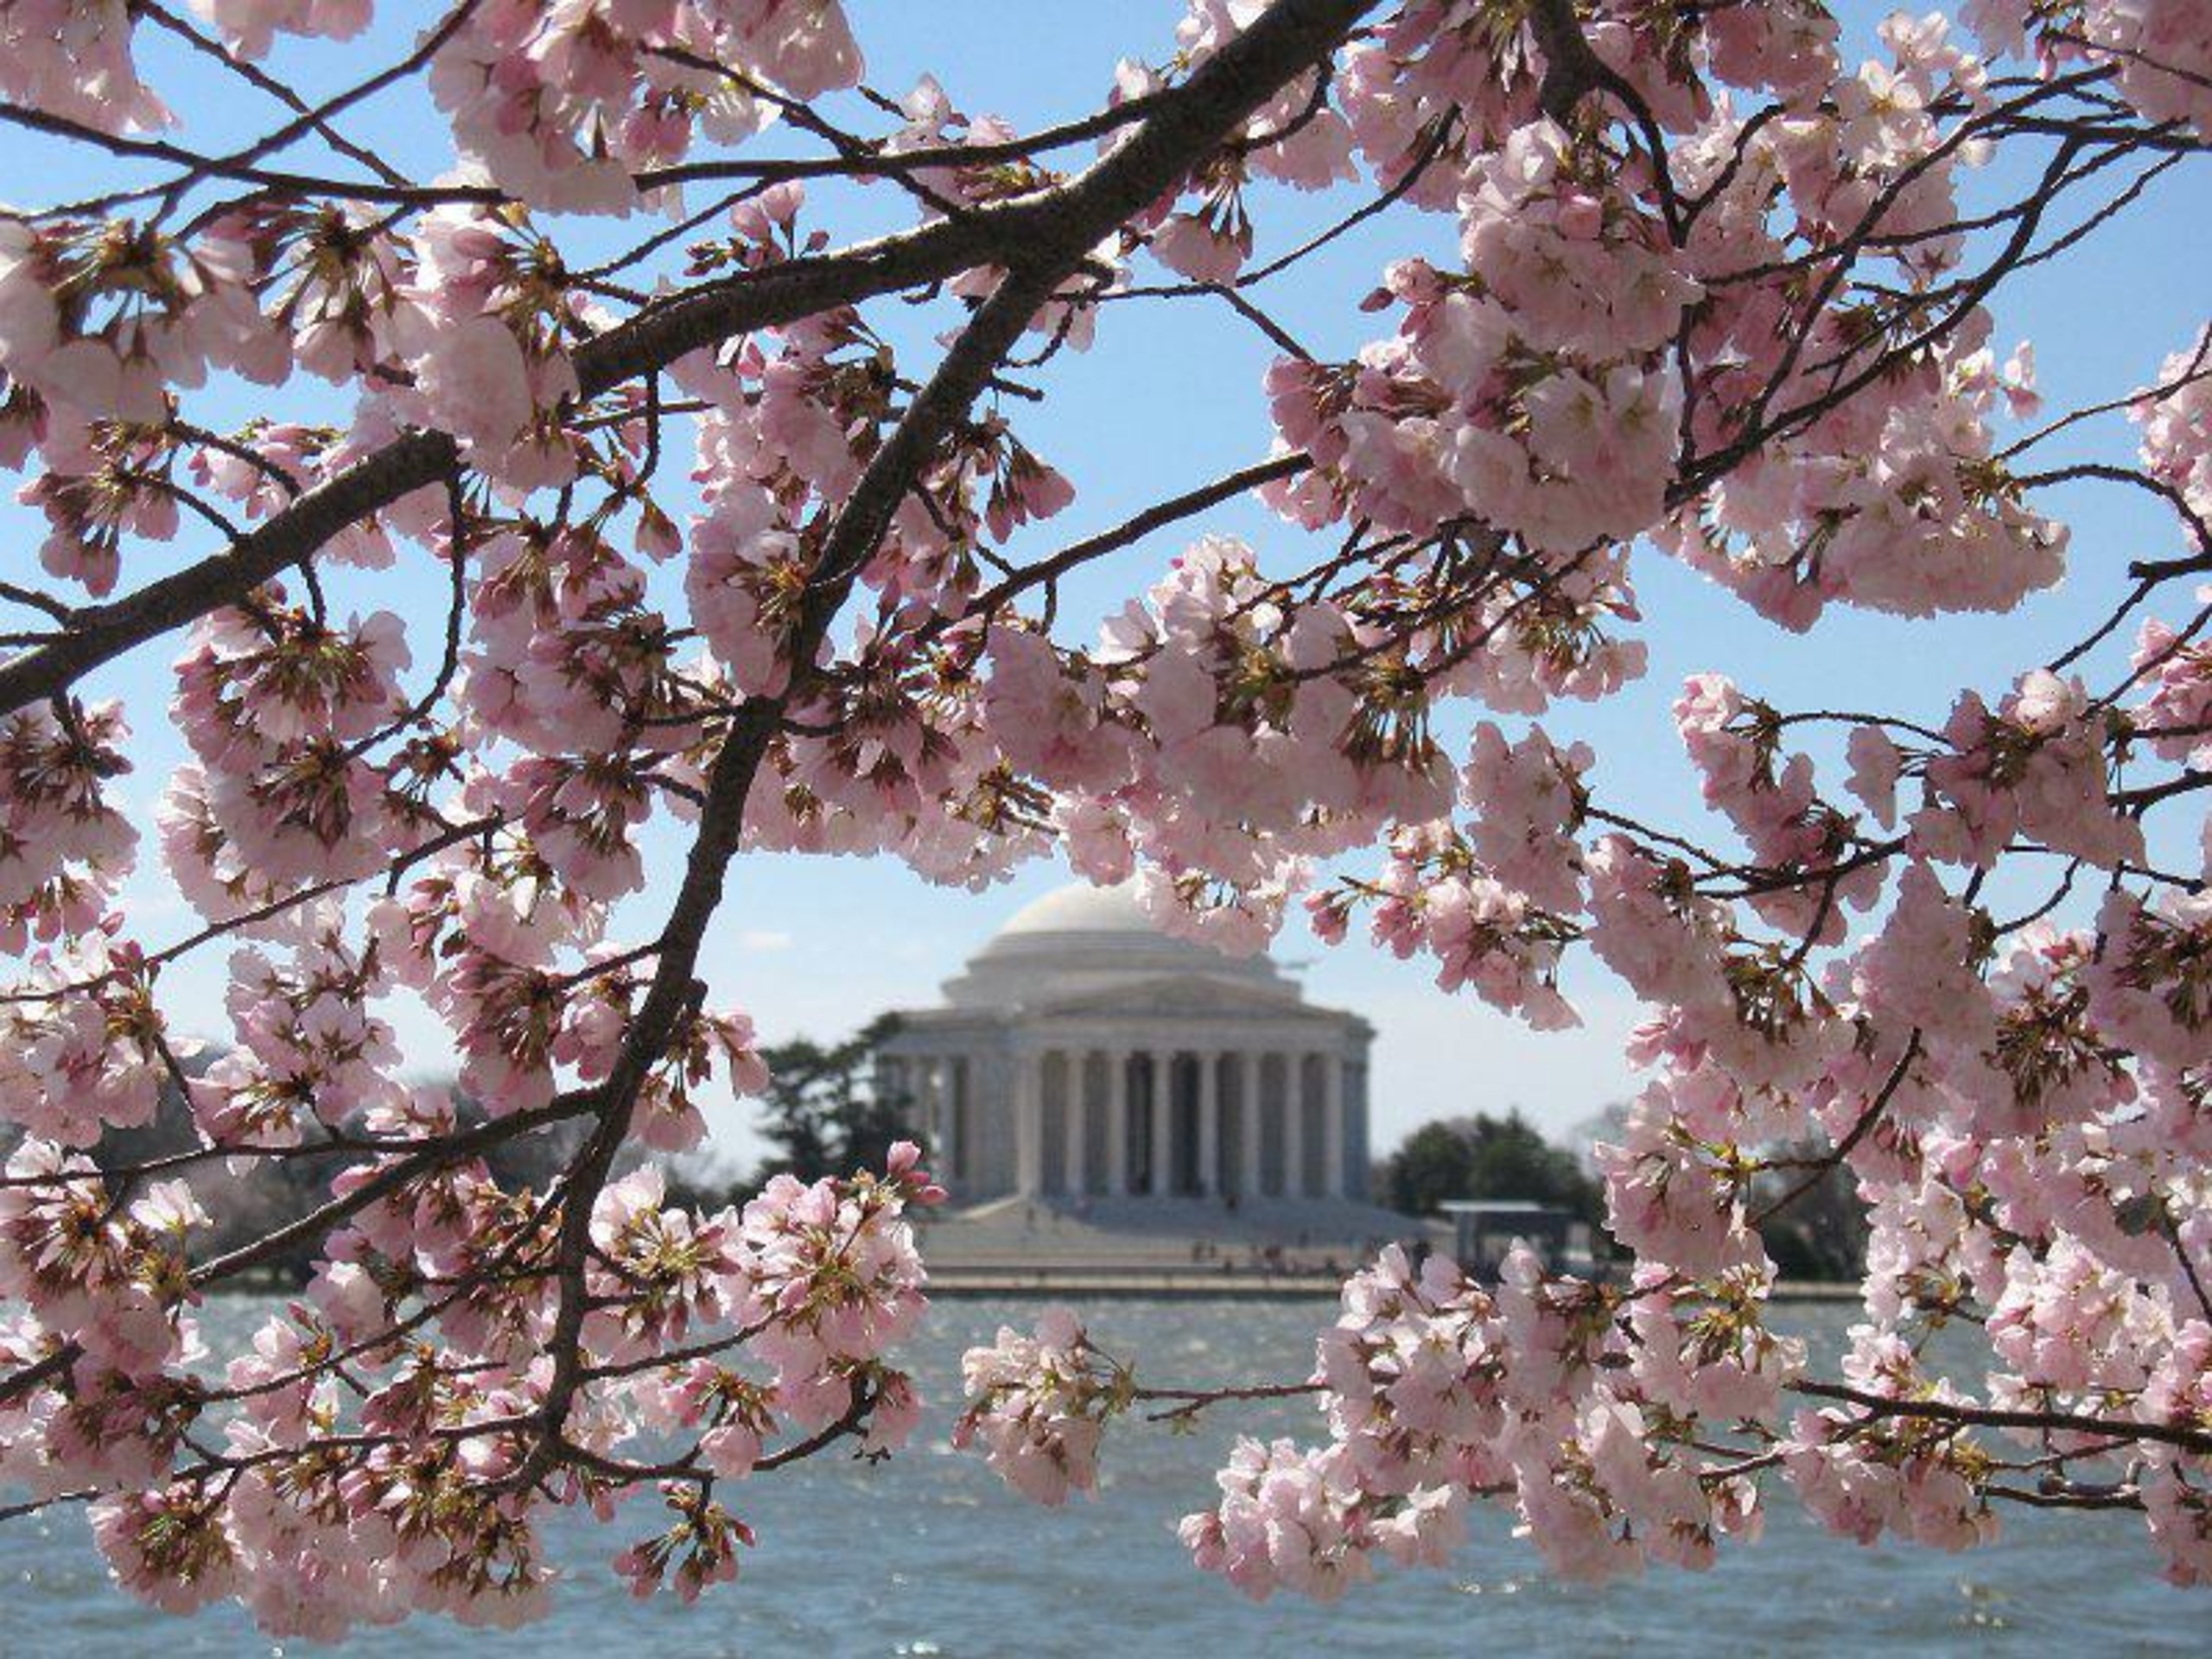 Cherry blossoms in front of the Lincoln memorial